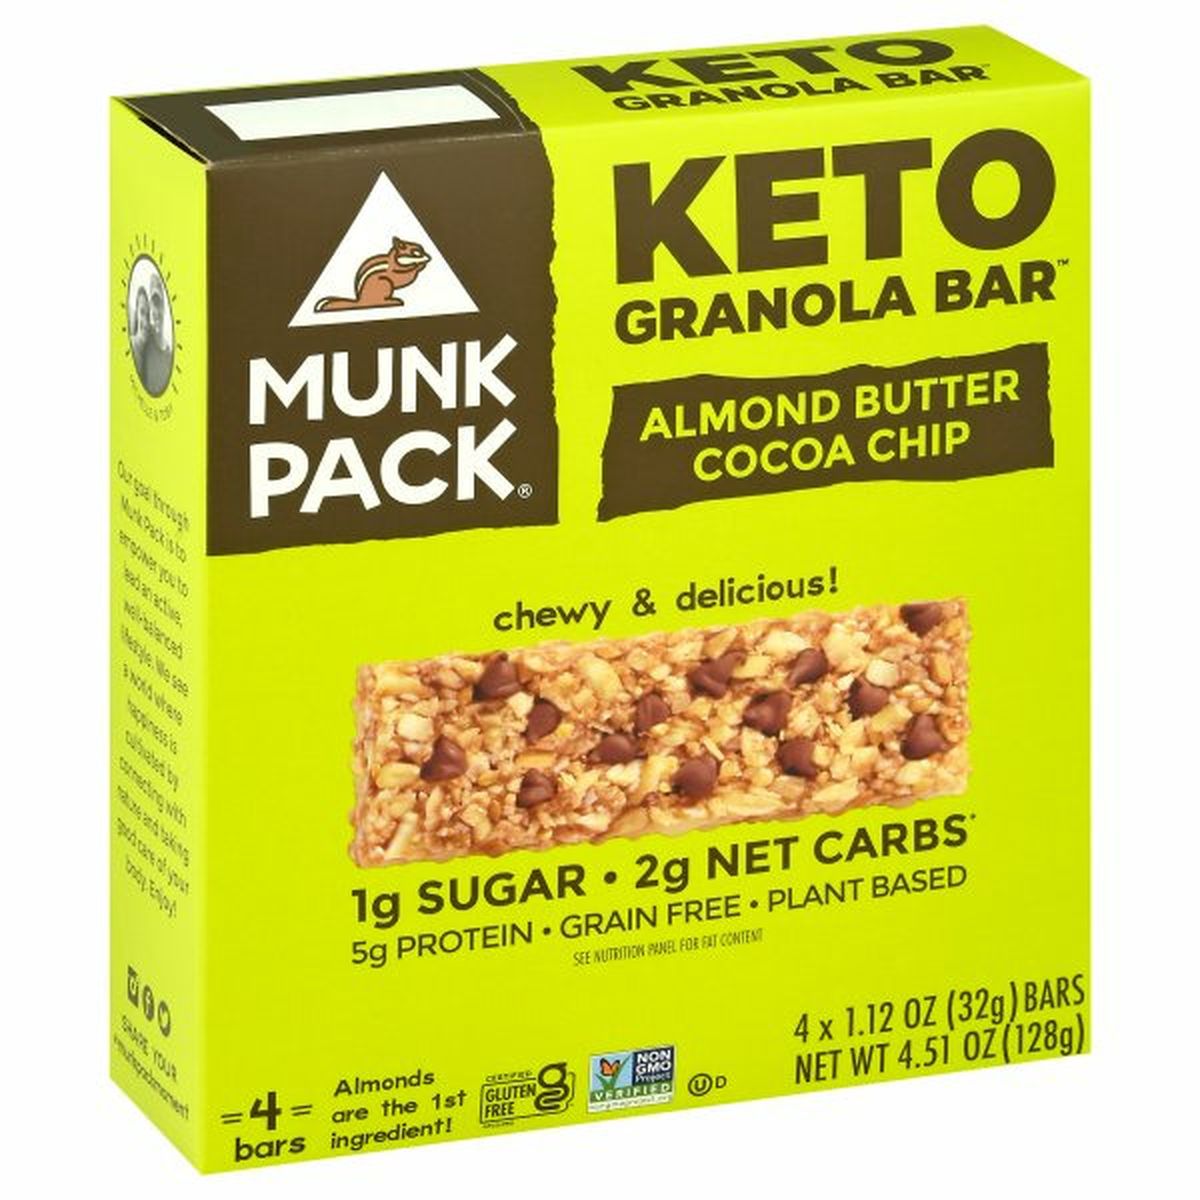 Calories in Munk Pack Granola Bar, Keto, Almond Butter Cocoa Chip